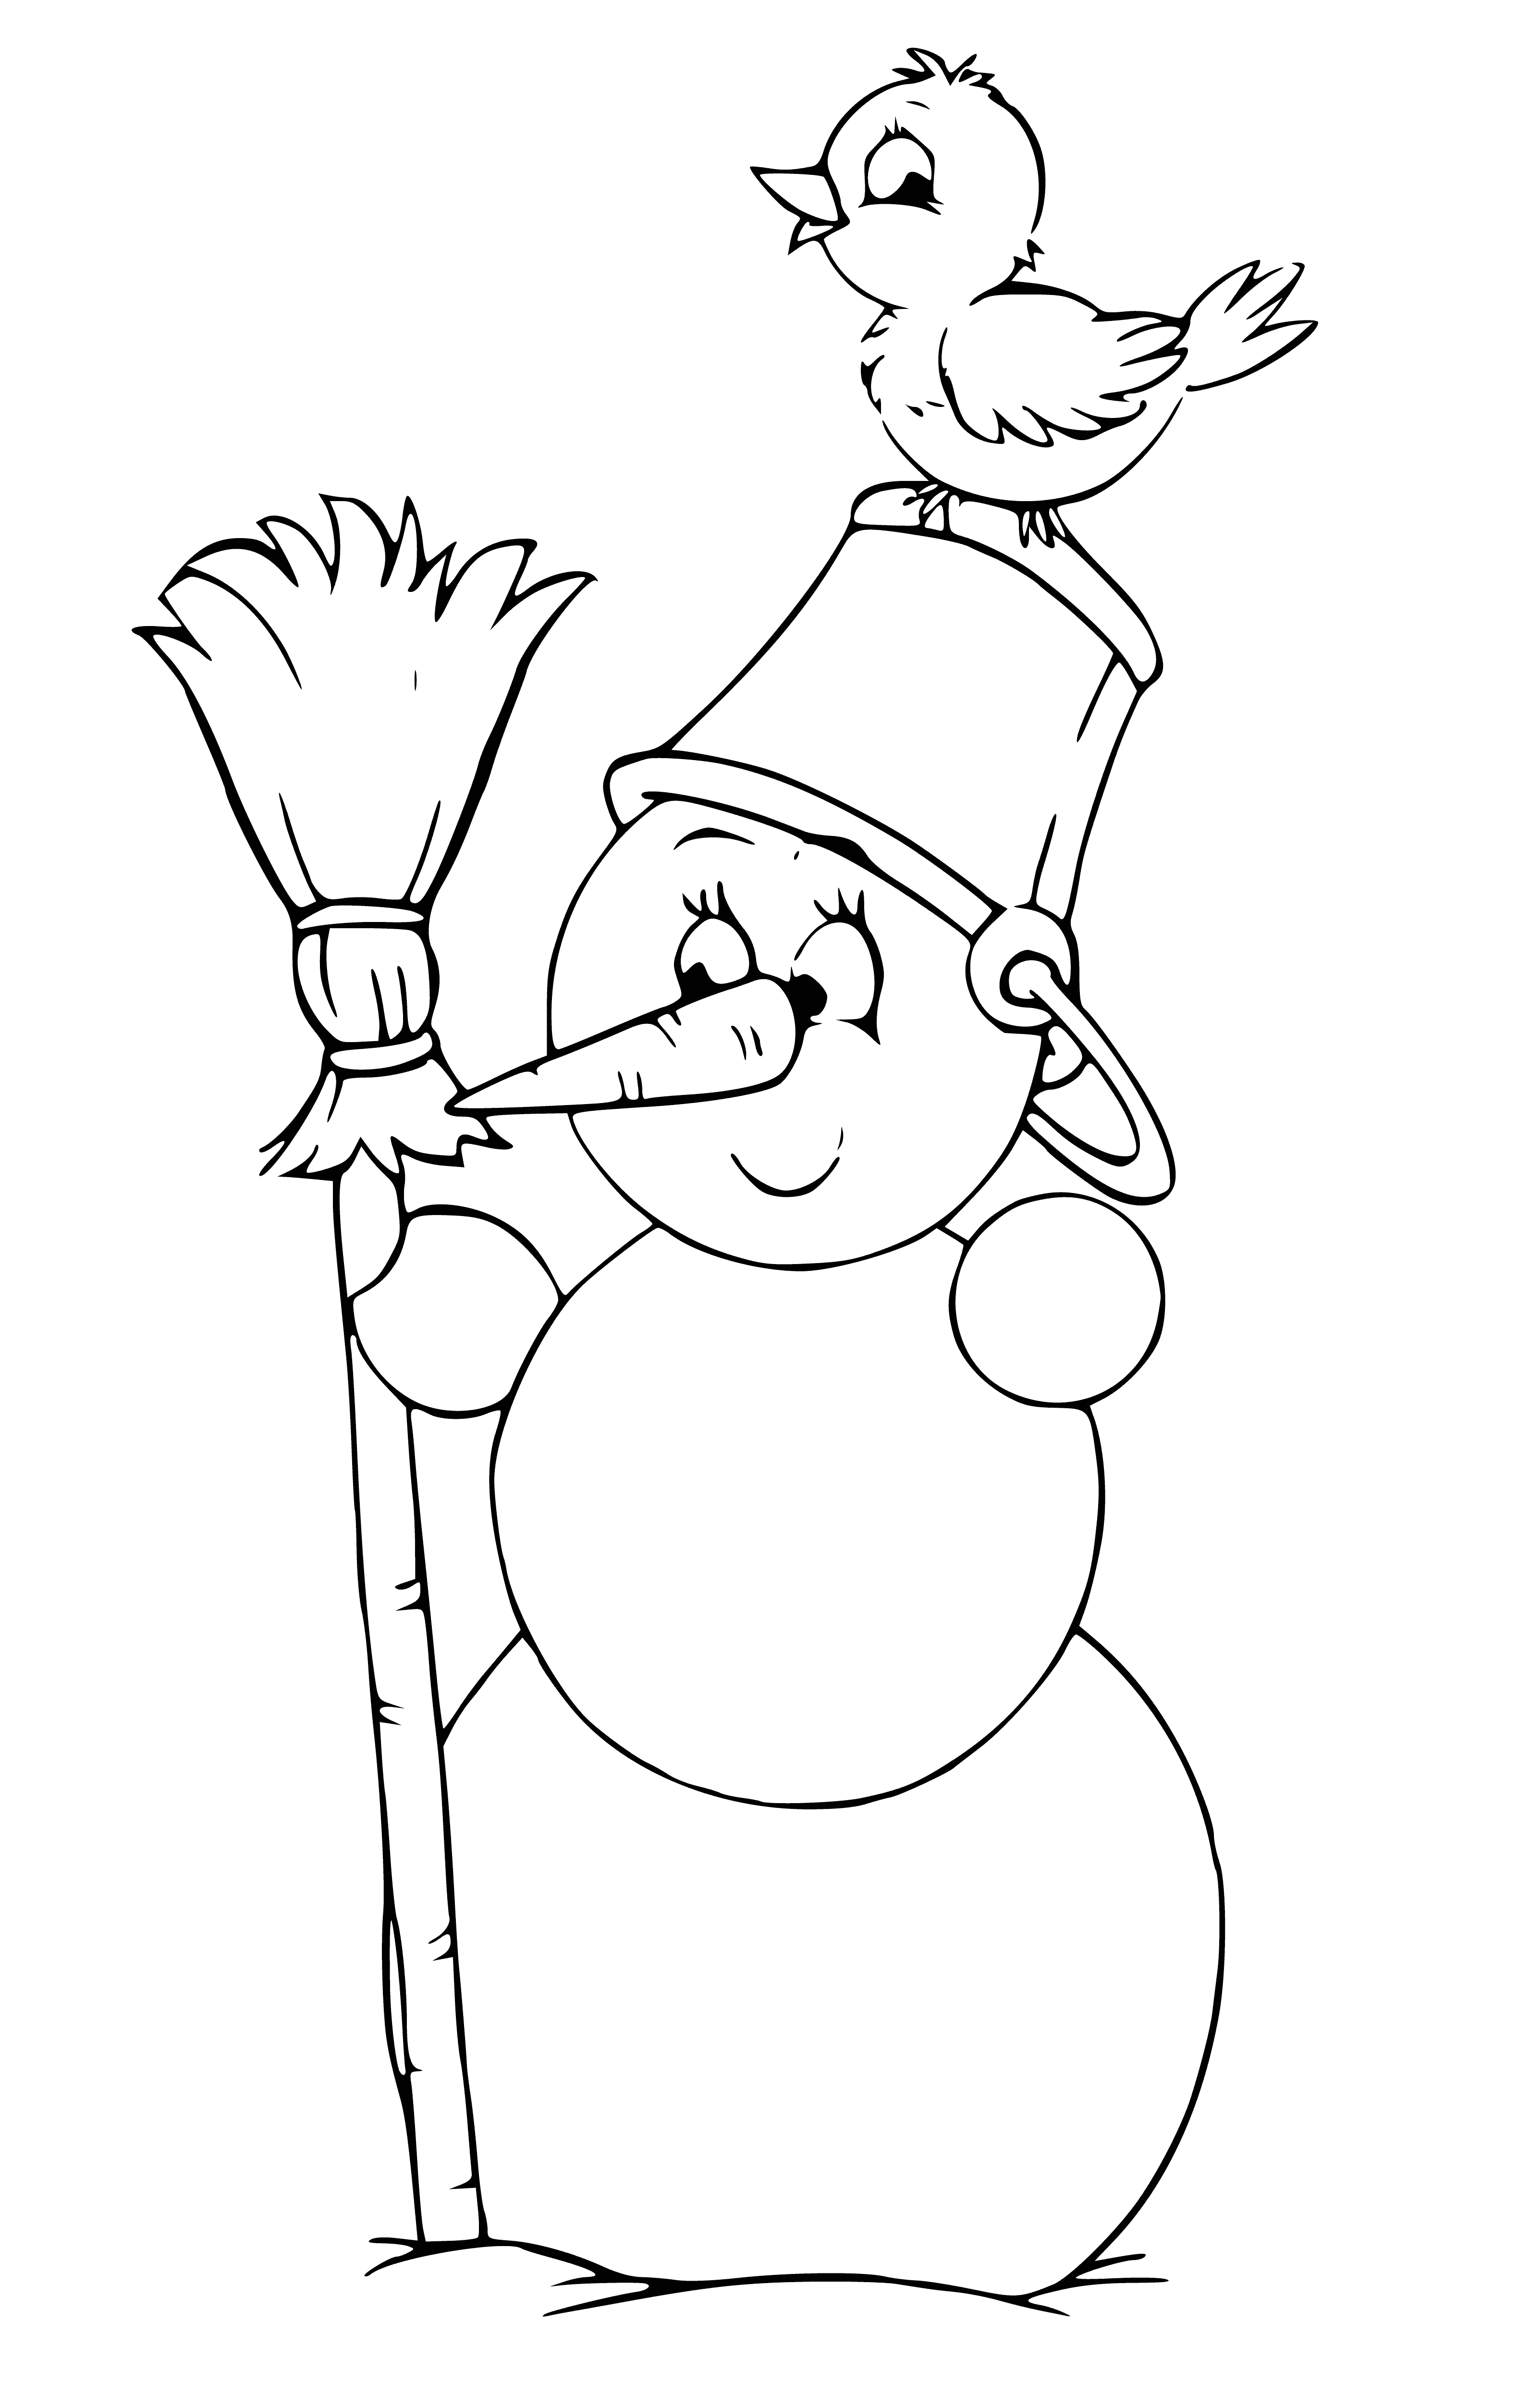 A snowman wearing a hat and scarf stands outside a house with a broom in hand. #winter